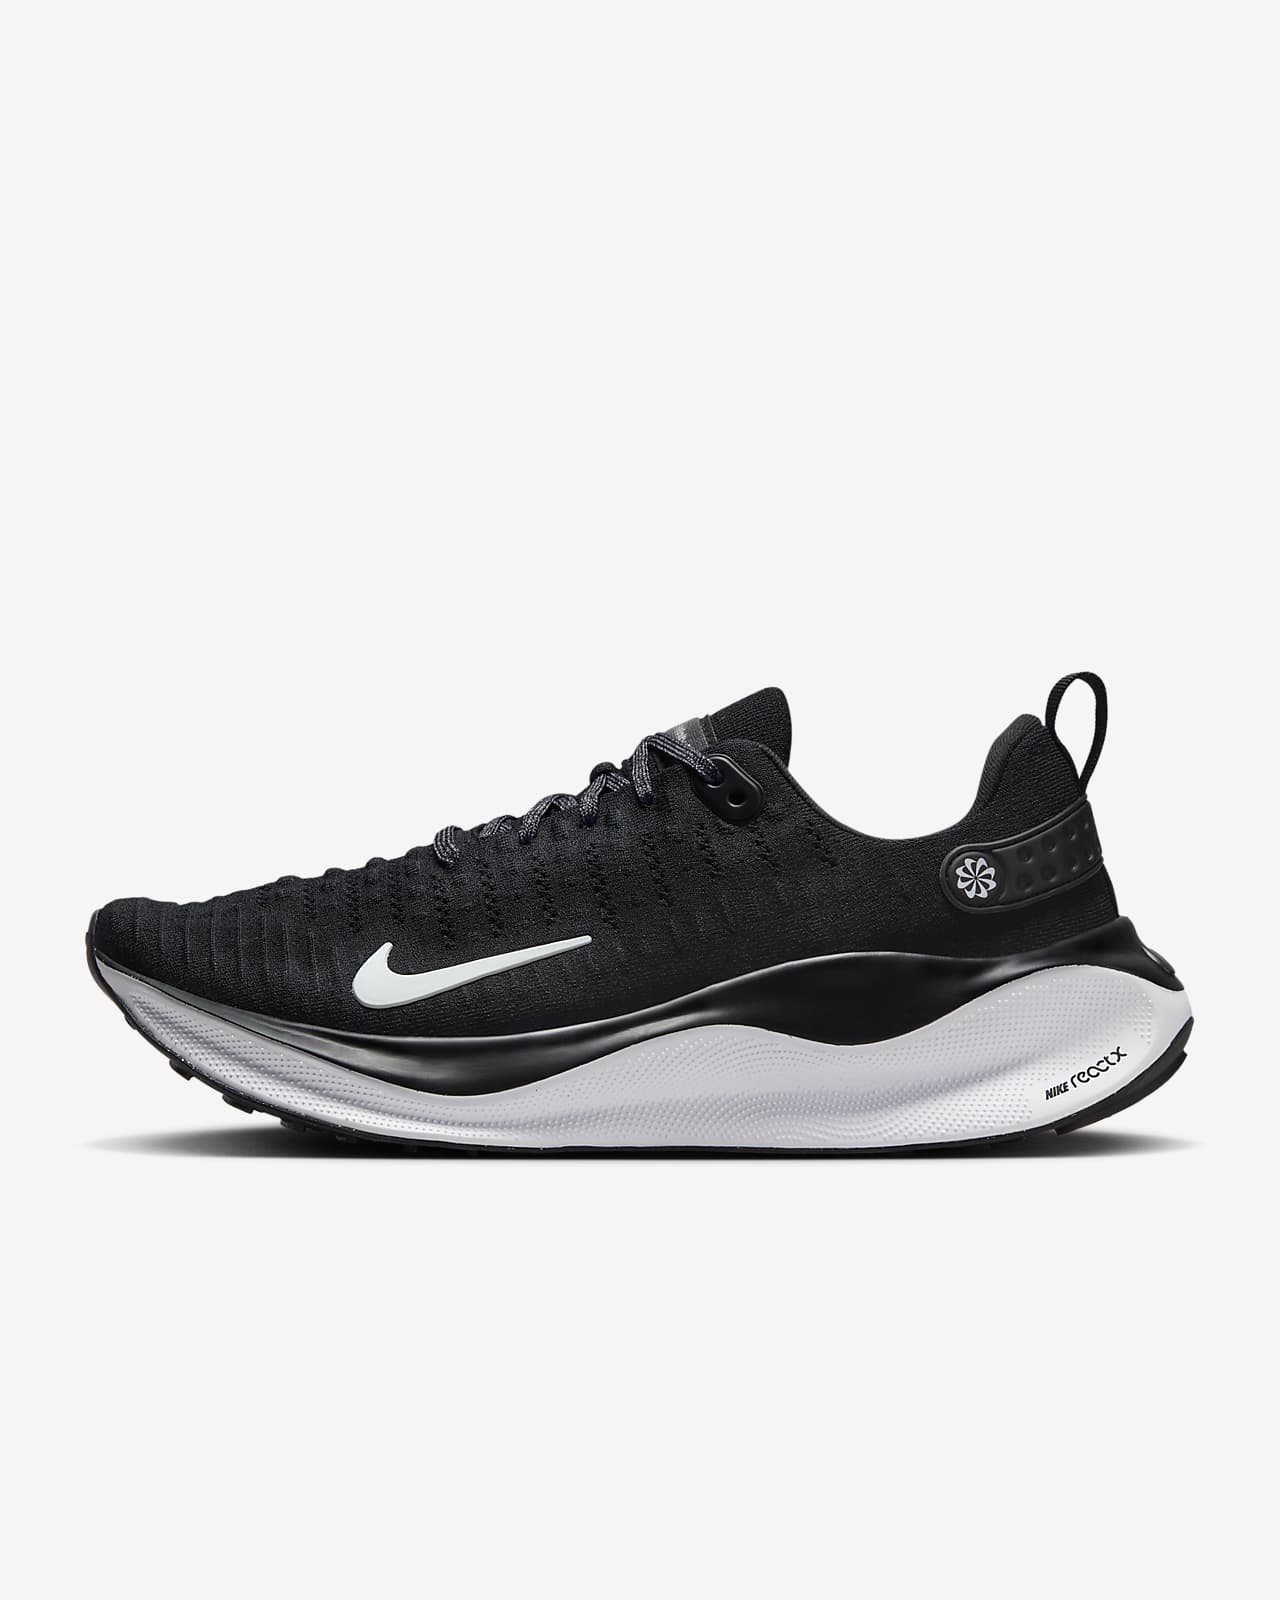 Chaussure de running sur route Nike InfinityRN 4 pour homme (extra-large)